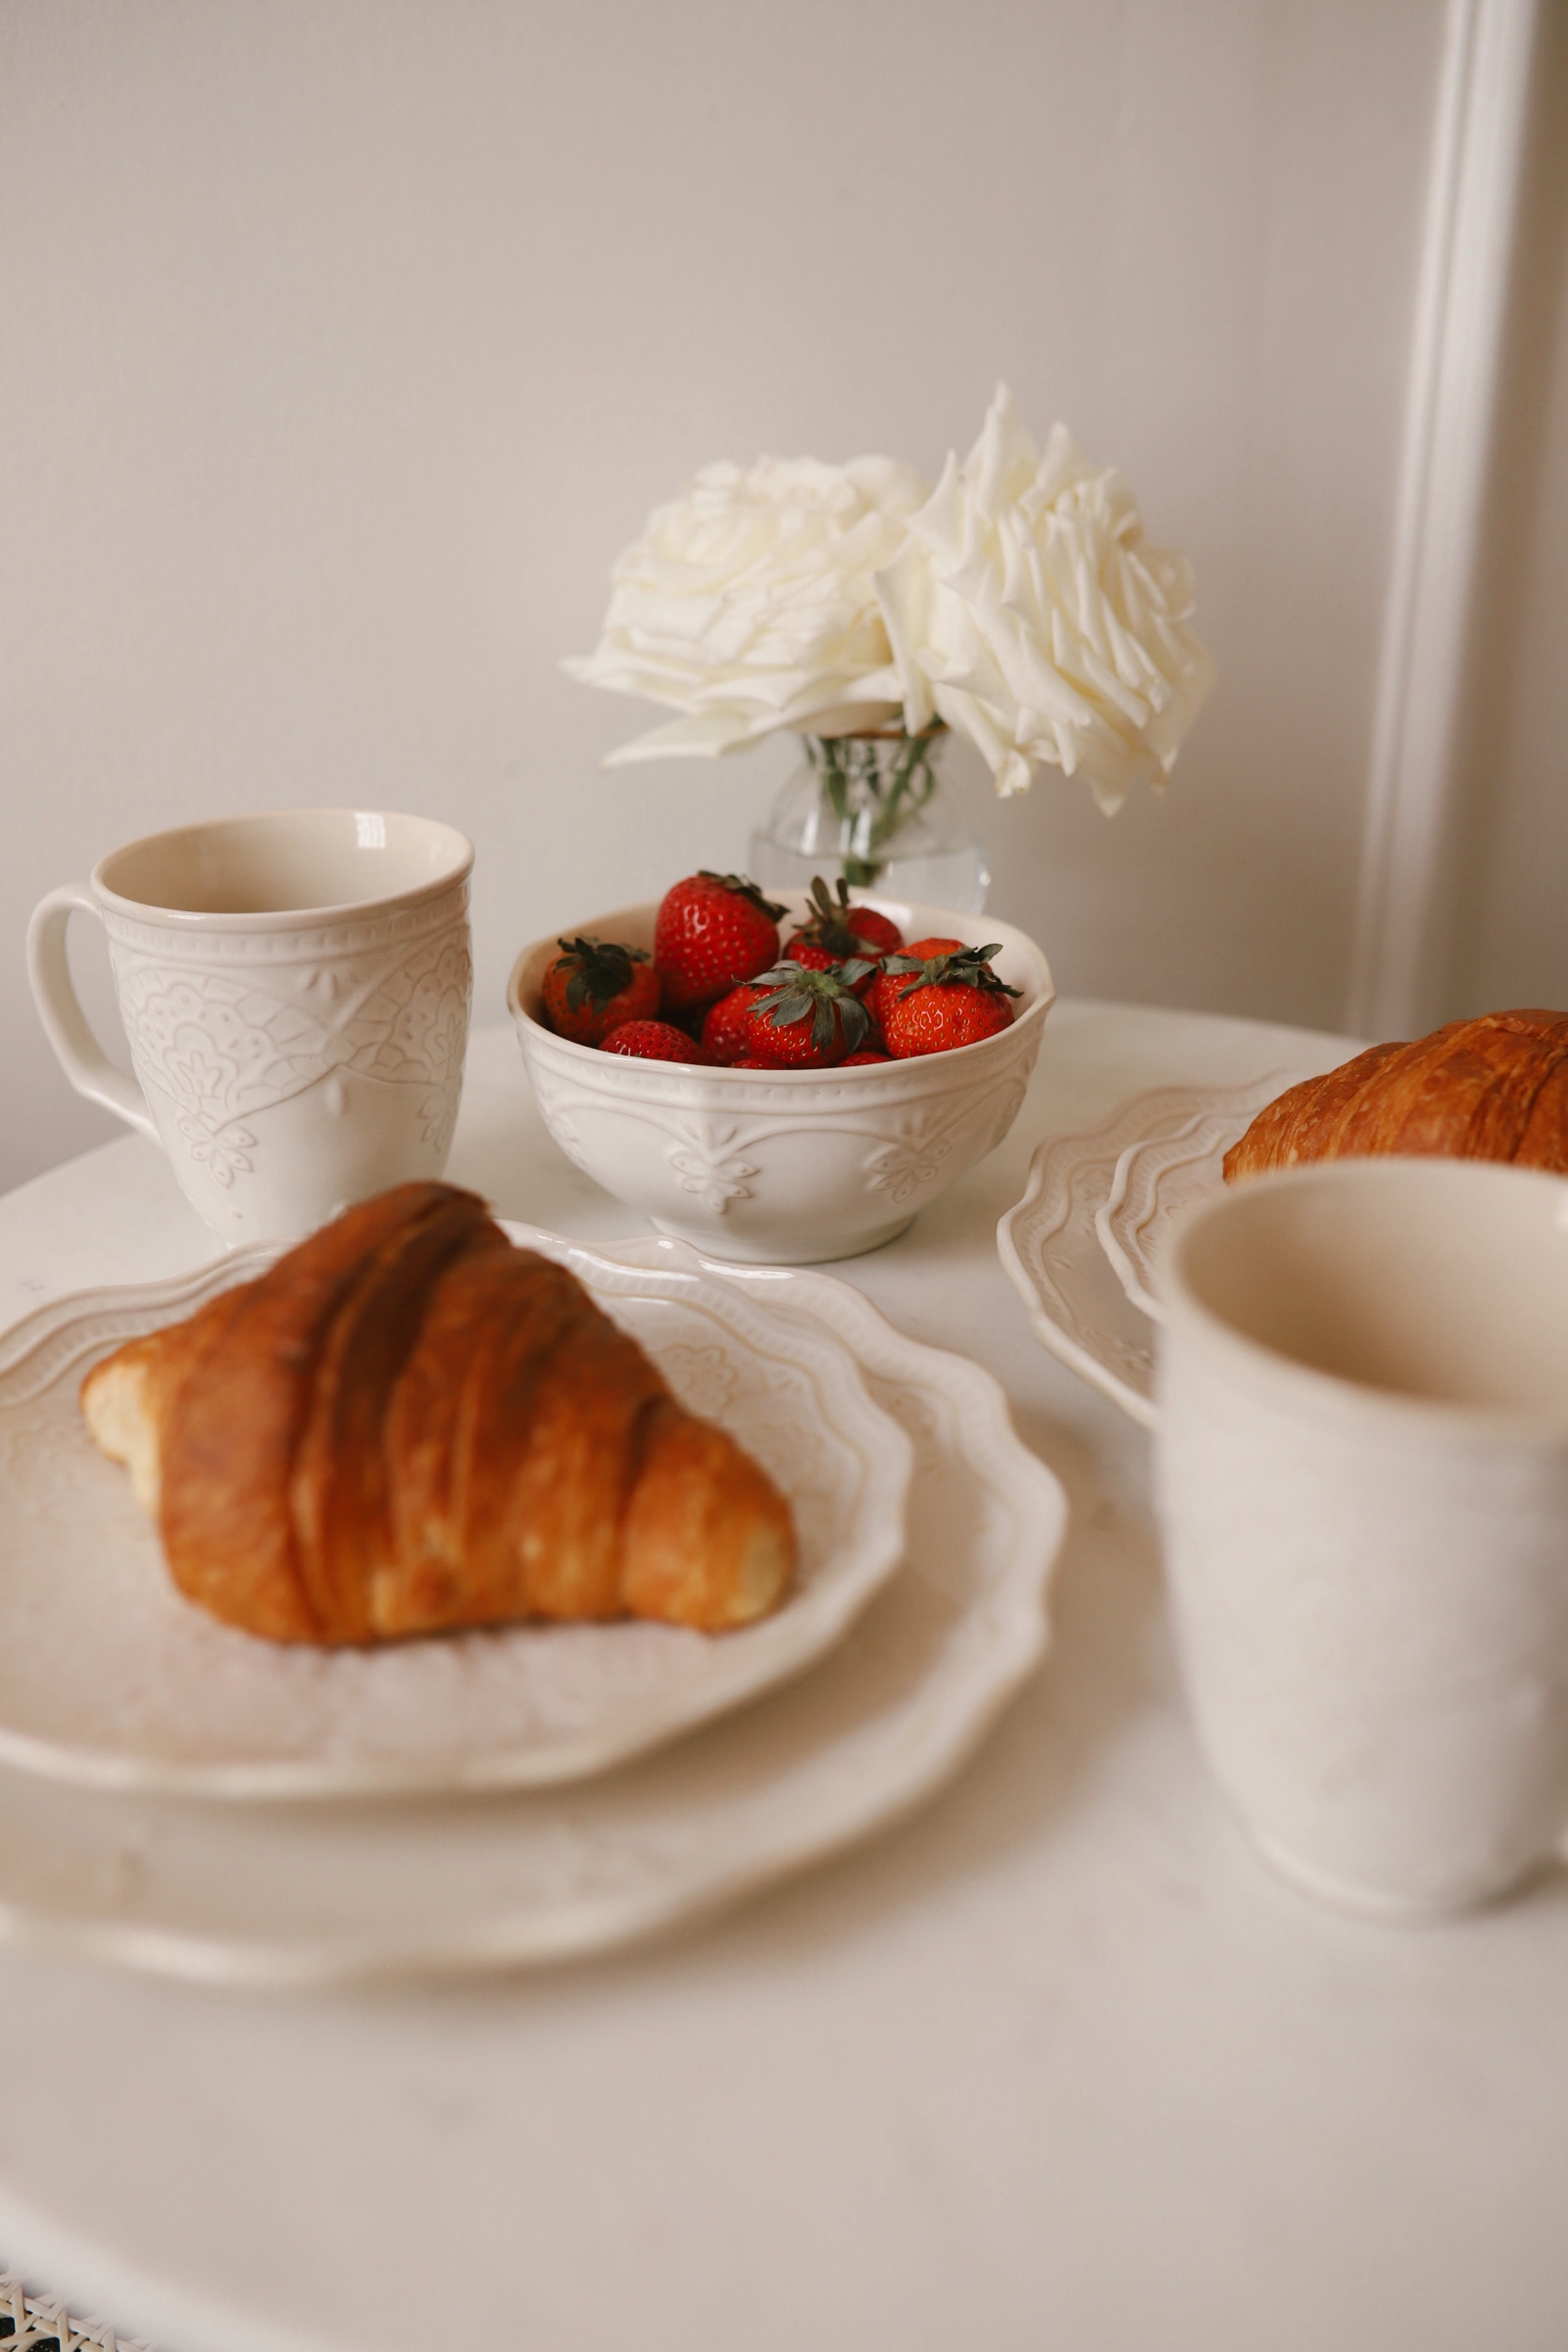 Croissant, coffee mugs, flowers, and fruit.